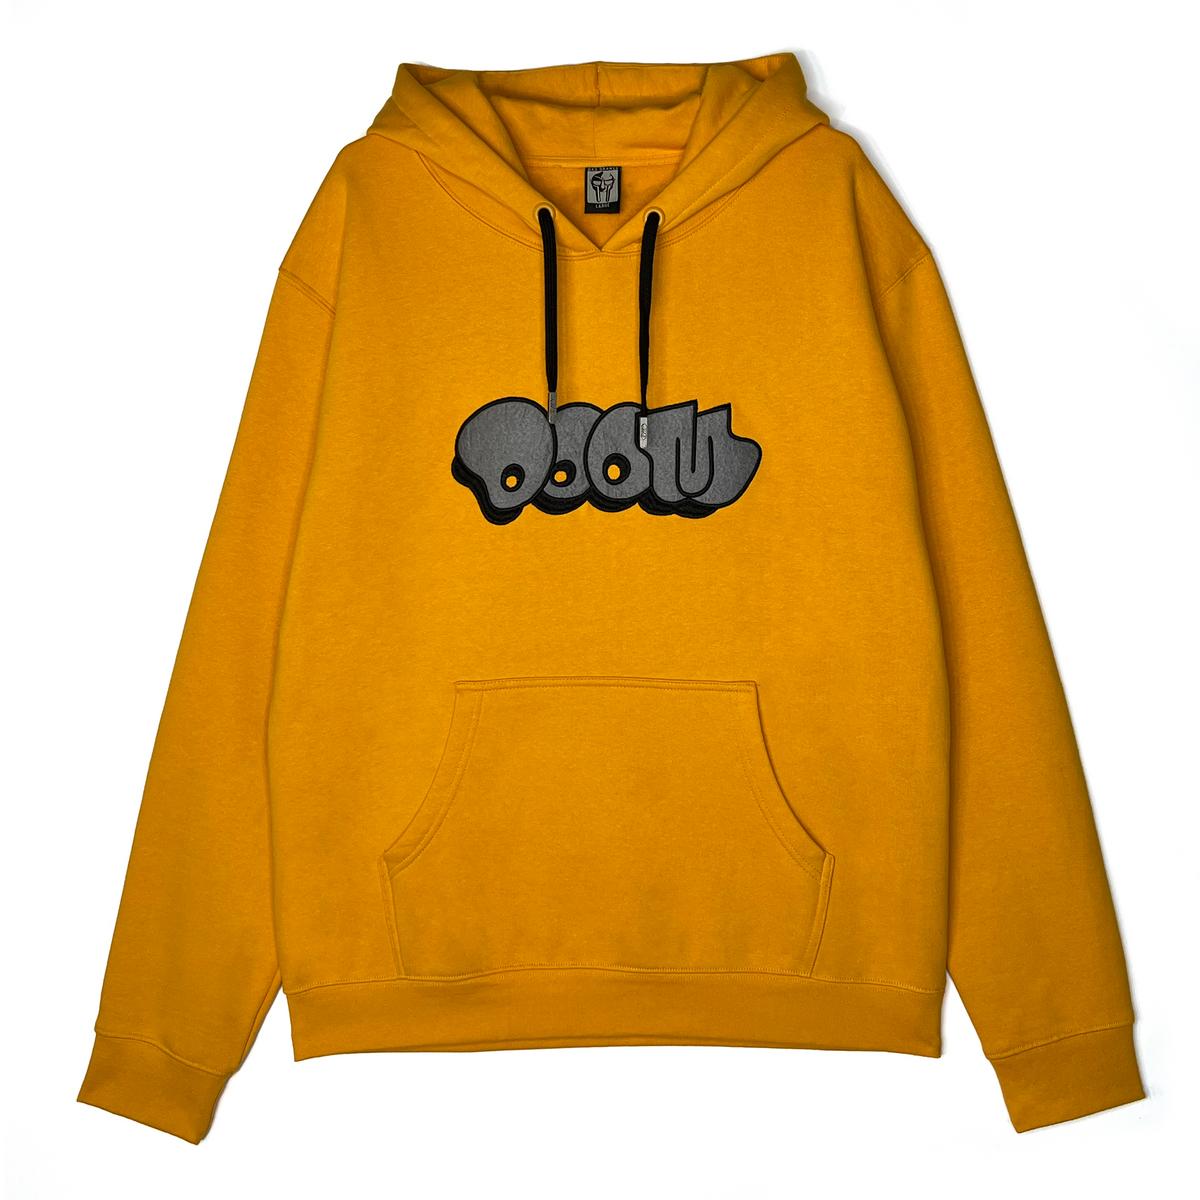 L'Orange / The Mad Writer on X: New mf doom merch. I love doom but is  this dope? am I missing something? Just seems weird all around to me but  idk  /